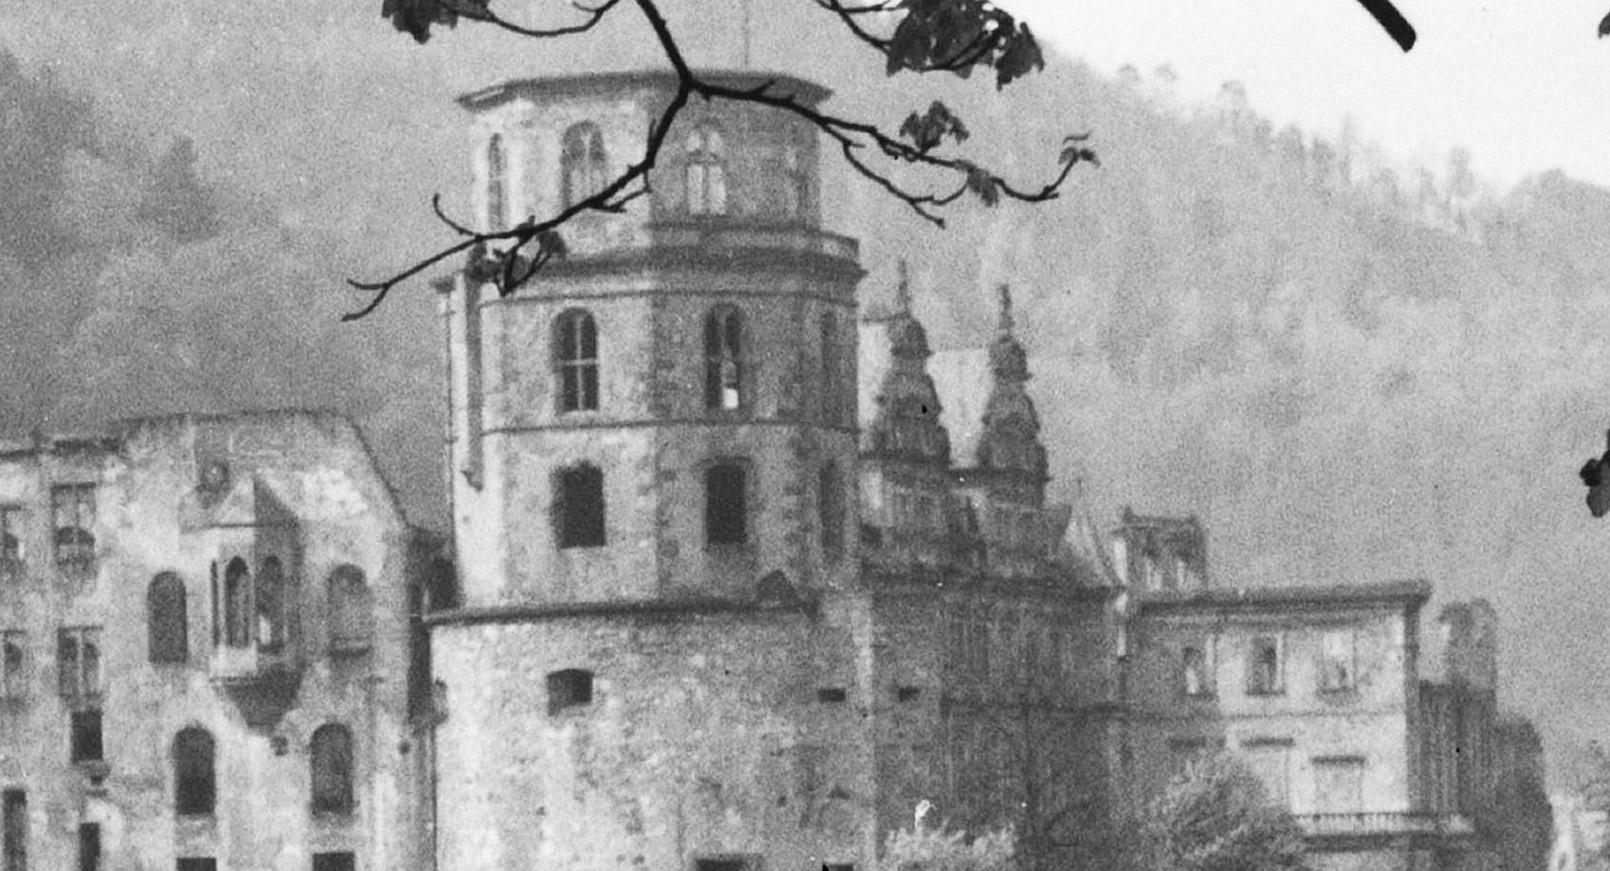 View to the Heidelberg castle, Germany 1938, Printed Later - Modern Photograph by Karl Heinrich Lämmel